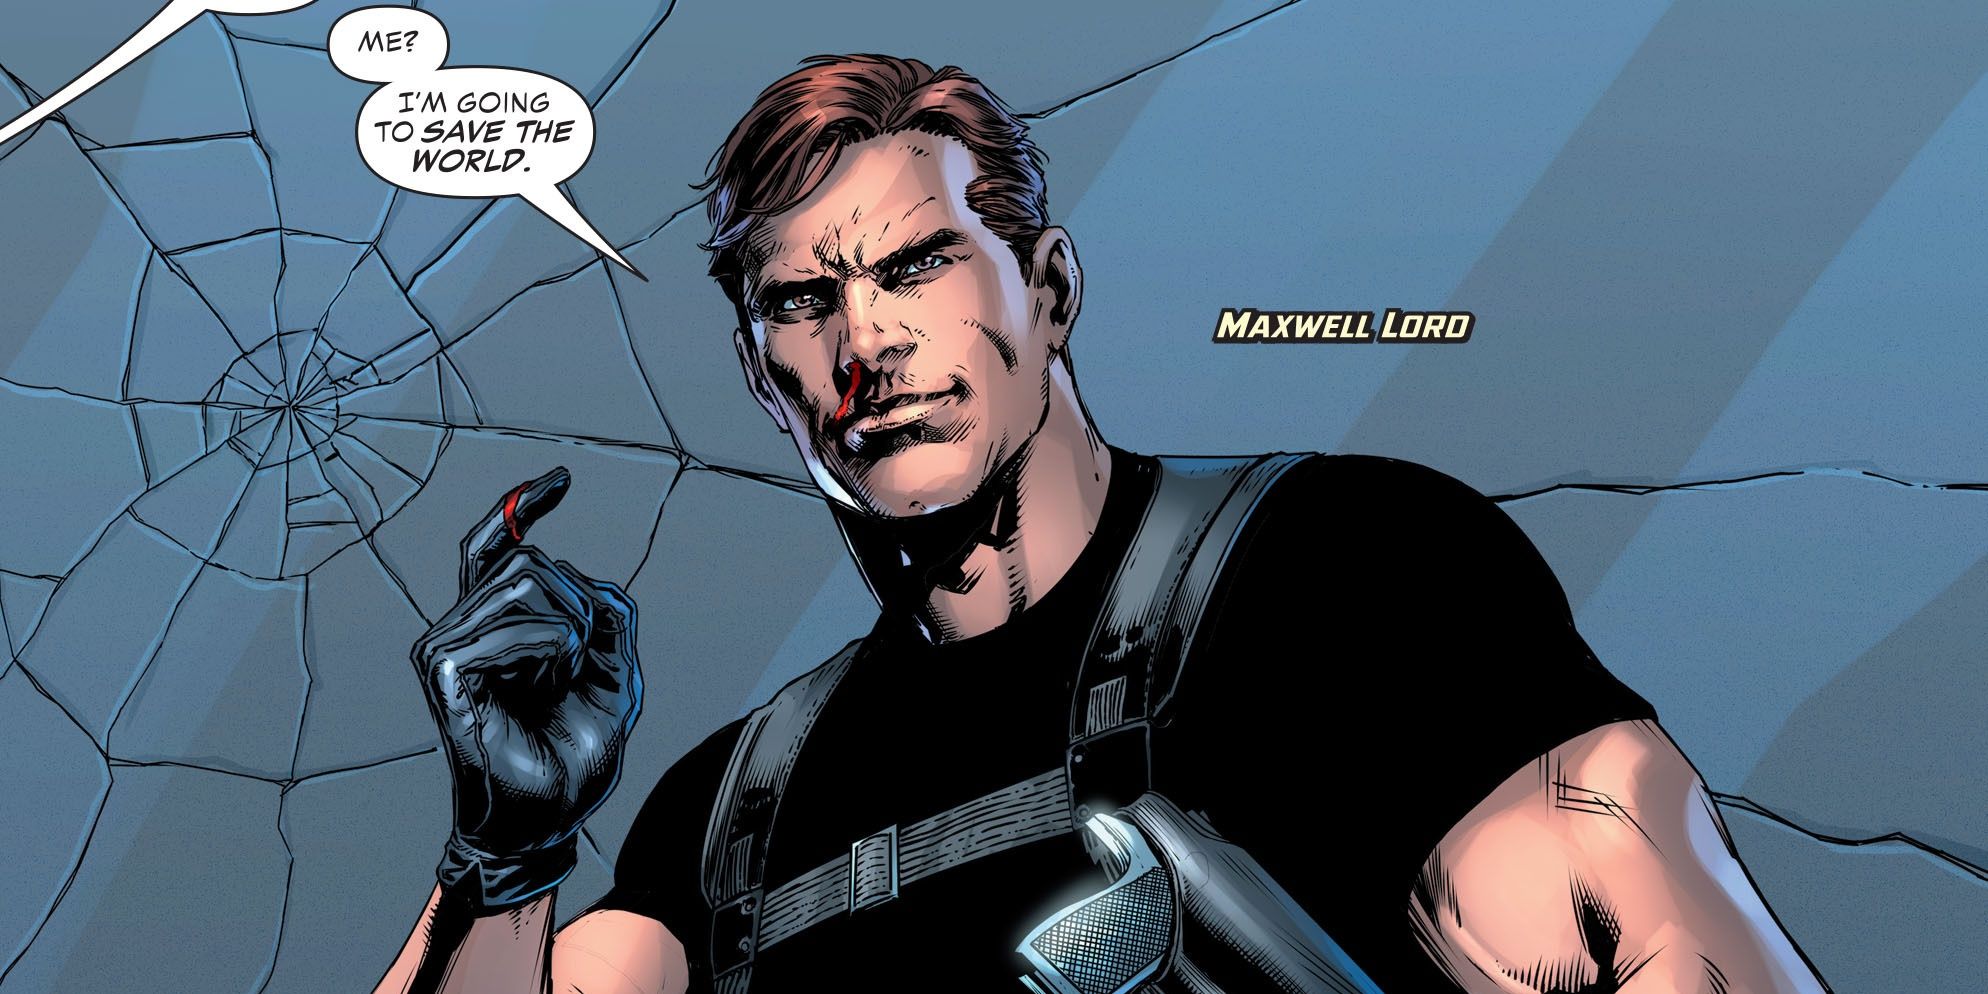 Maxwell Lord smirking while declaring that he's about to save the world.